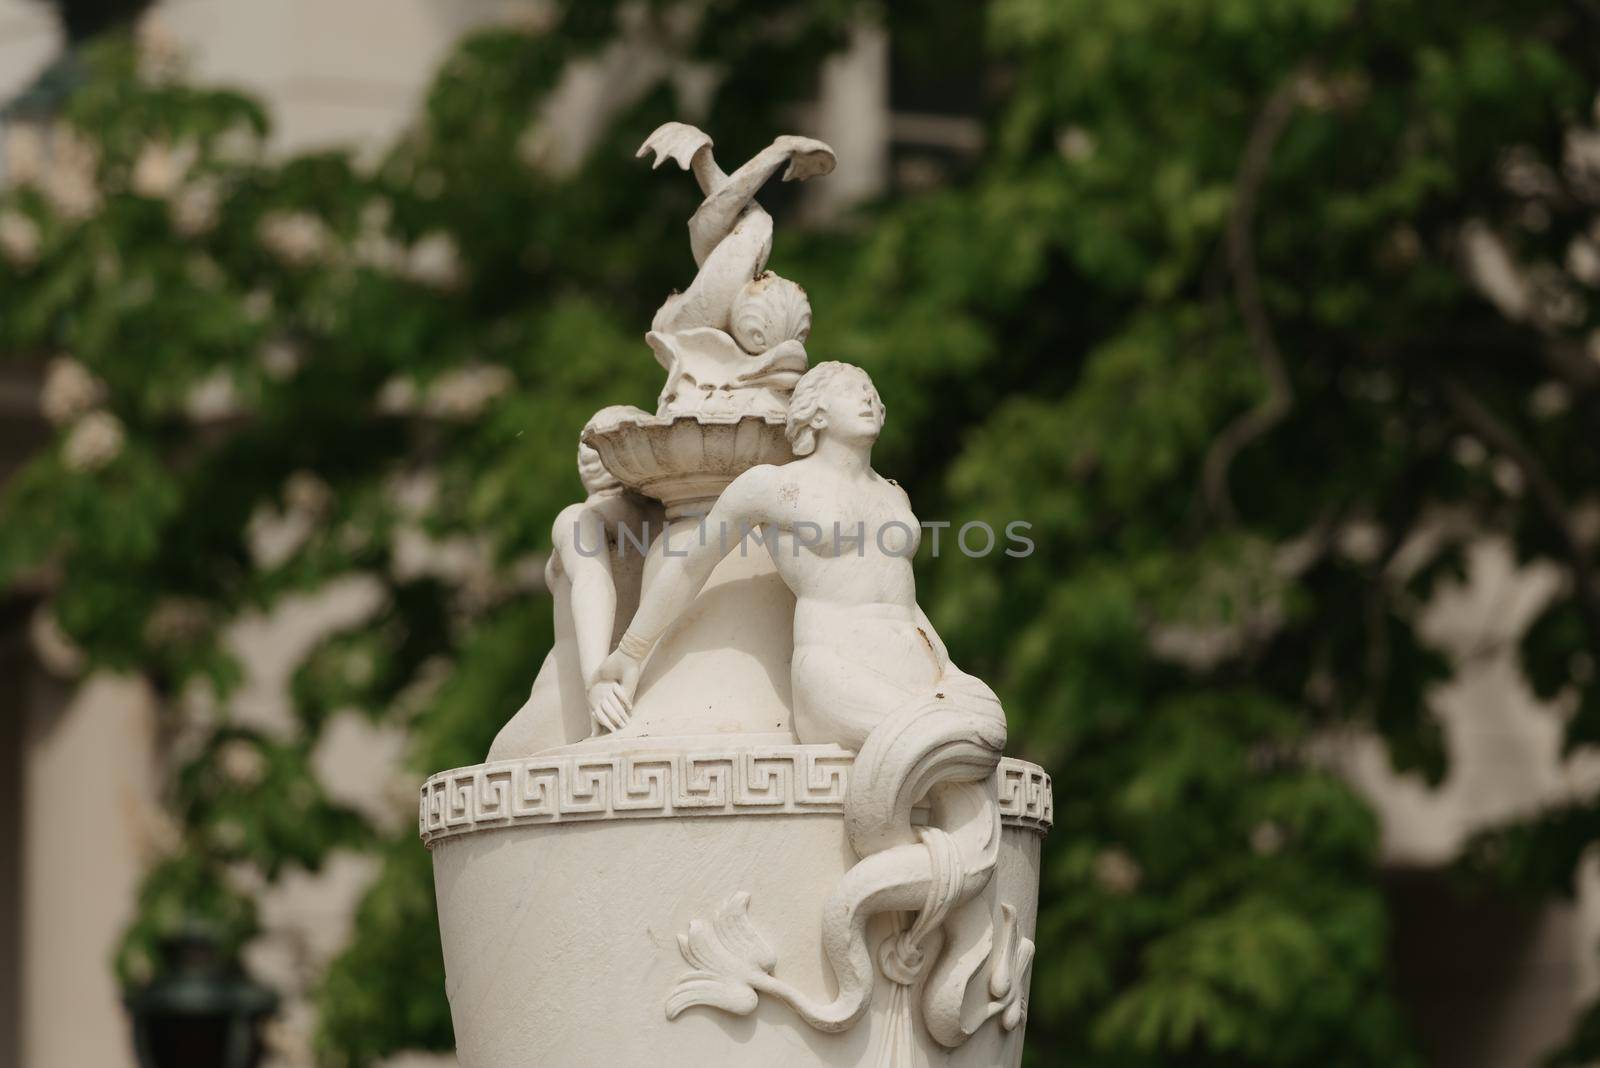 Warsaw, Poland - MAY 12, 2022: A head of the old outdoor vase with sculptures in Royal Baths Park, Lazienki Park